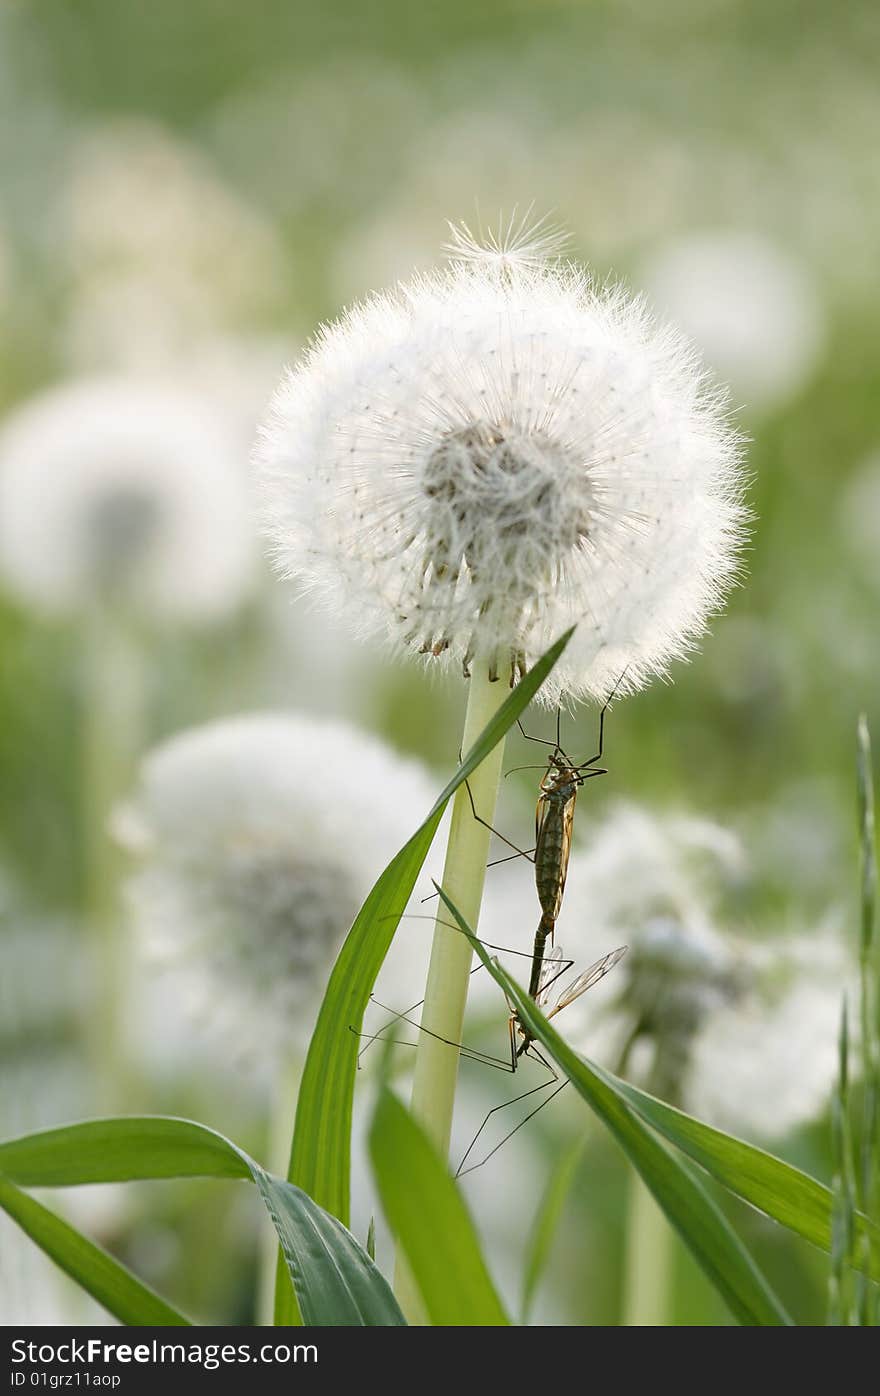 Dandelion blowing its seed in the wind, appointment under dandelion, dandelion on the green meadow background, the end of spring time. Dandelion blowing its seed in the wind, appointment under dandelion, dandelion on the green meadow background, the end of spring time